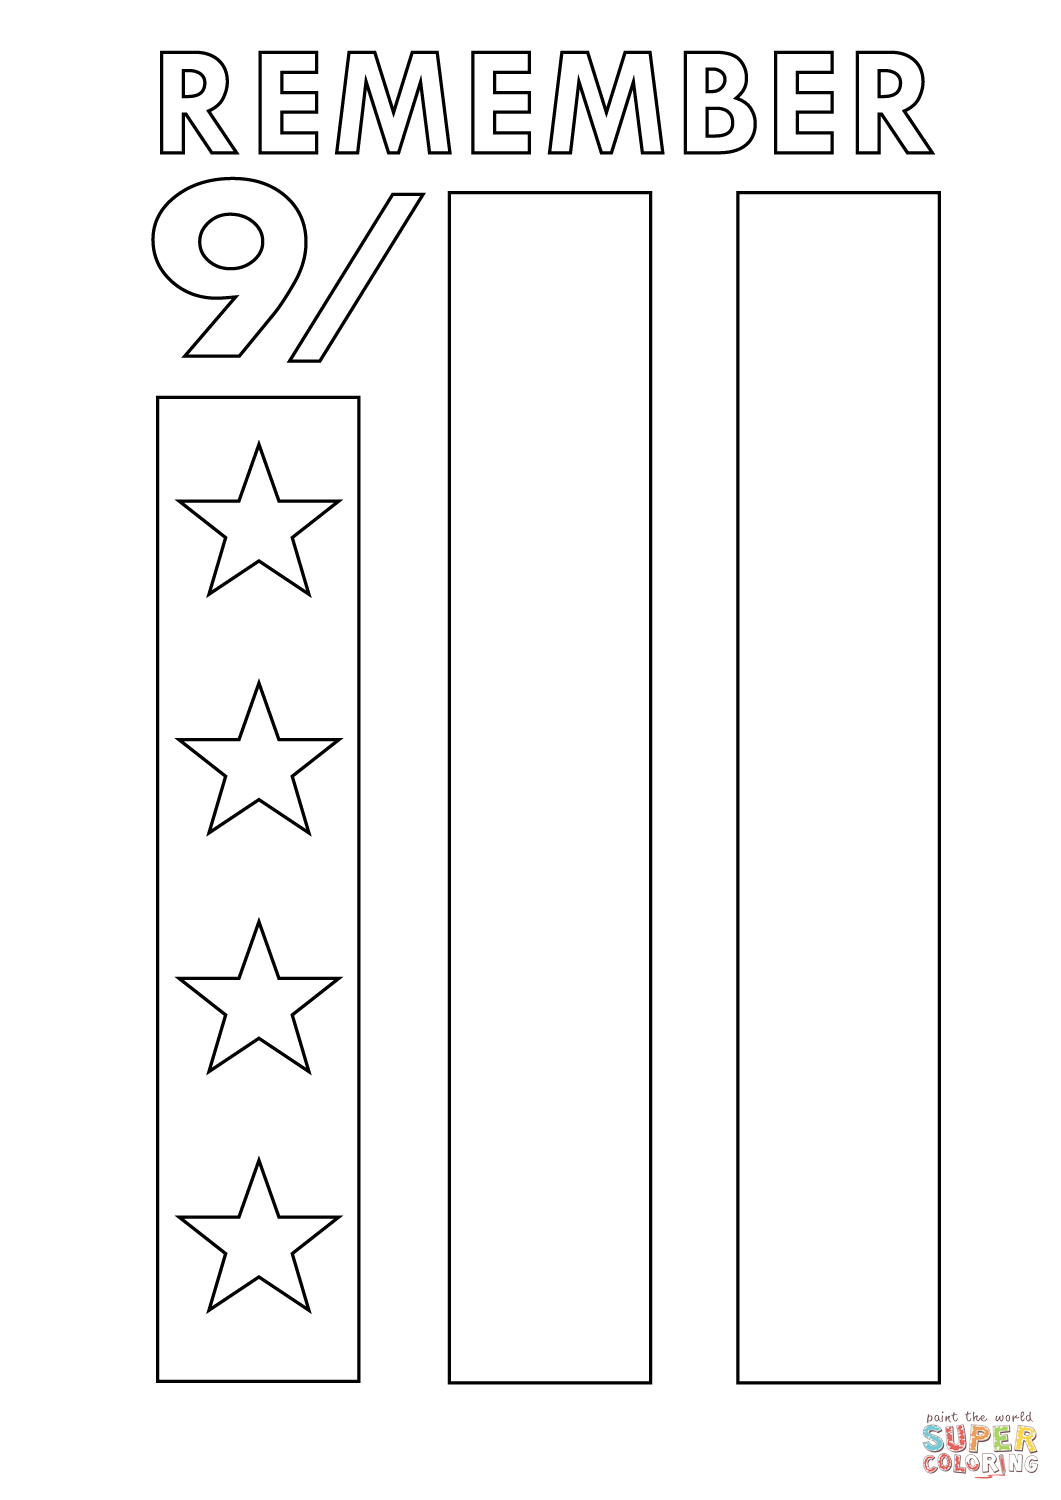 Coloring Pages For September Remember 911 Coloring Page Free Printable Coloring Pages